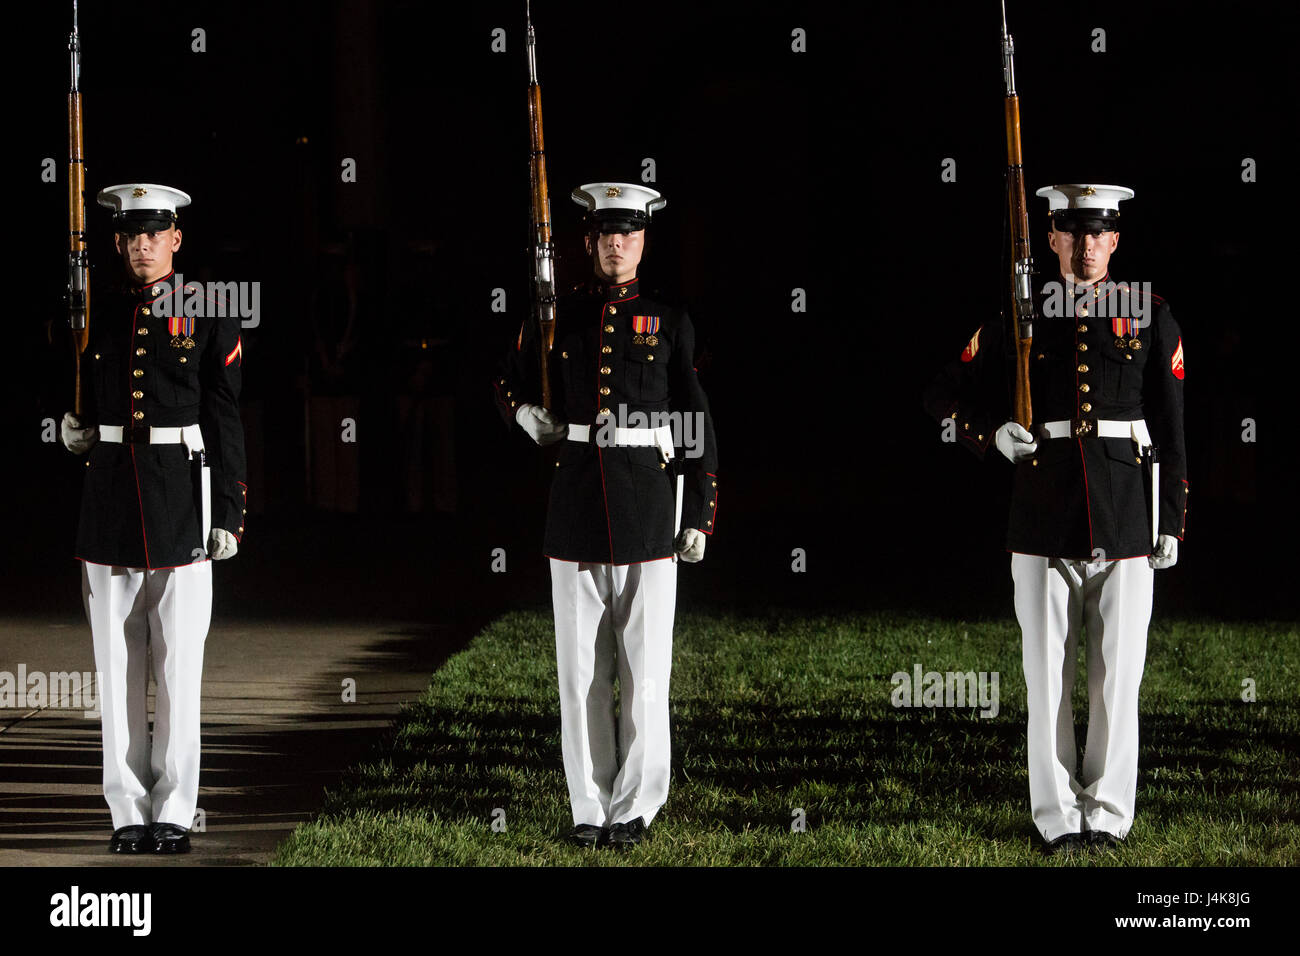 The U.S. Marine Corps Silent Drill Platoon executes their long line sequence during a Friday Evening Parade at Marine Barracks Washington D.C., May 5, 2017. The guests of honor for the parade were the Honorable Paul Cook, California’s 8th Congressional District Congressman, the Honorable Jack Bergman, Michigan’s 1st Congressional District Congressman, and the Honorable Salud Carbajal, California’s 24th Congressional District Congressman. The hosting official was Gen. Glenn Walters, assistant commandant of the Marine Corps. (Official Marine Corps photo by Cpl. Robert Knapp/Released) Stock Photo